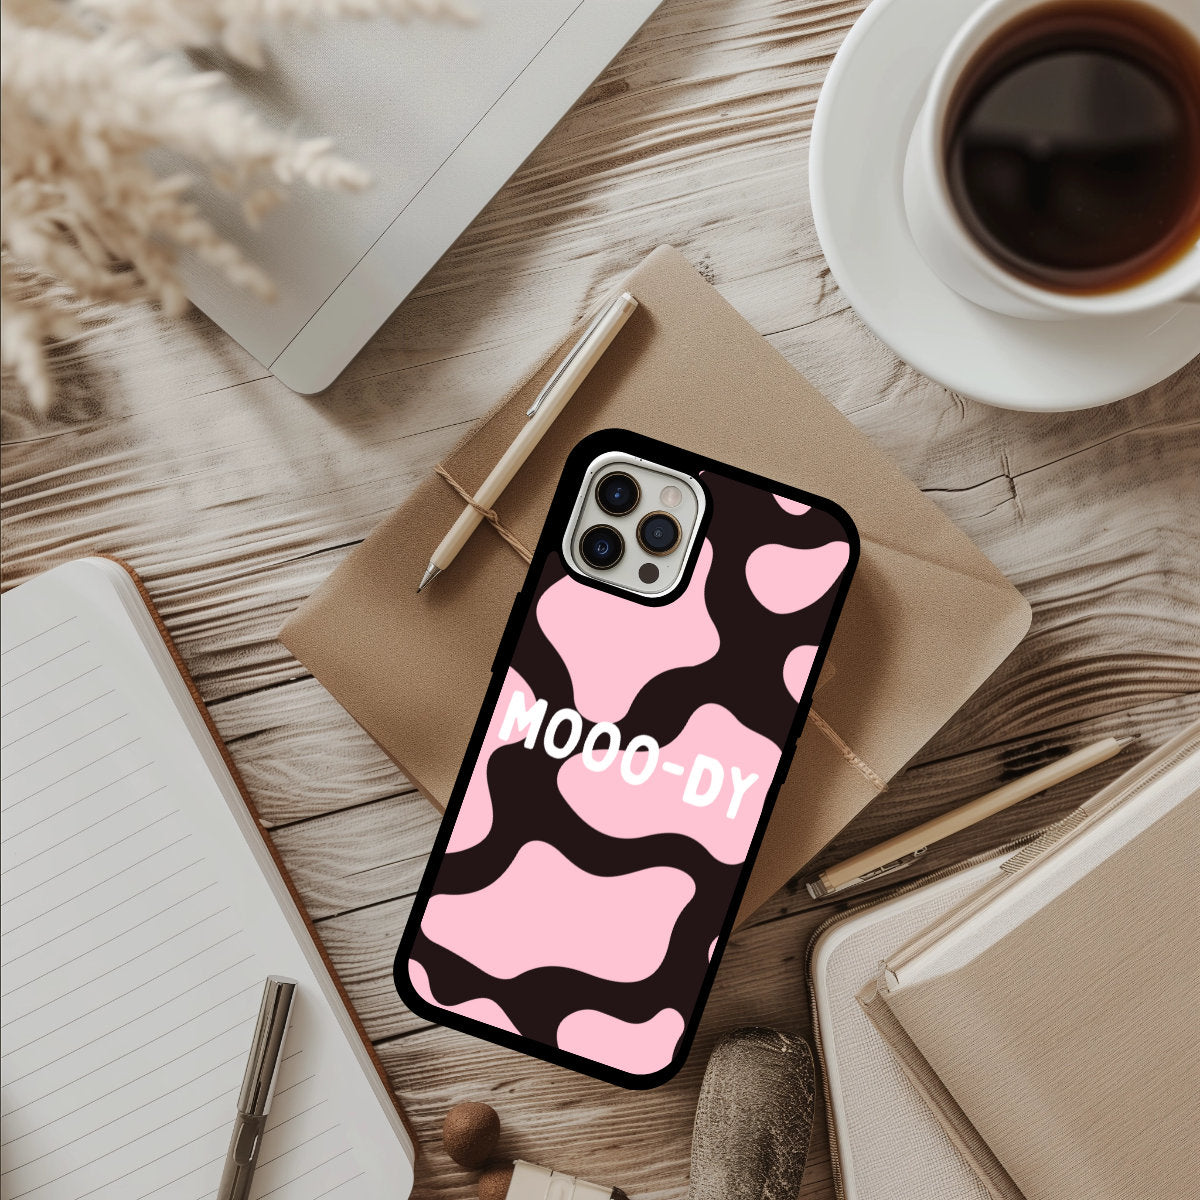 Cow Print Phone Case perfect gift for her - cute phone case - best birthday gift - iphone case - howdy phone case - pink iphone case - girly